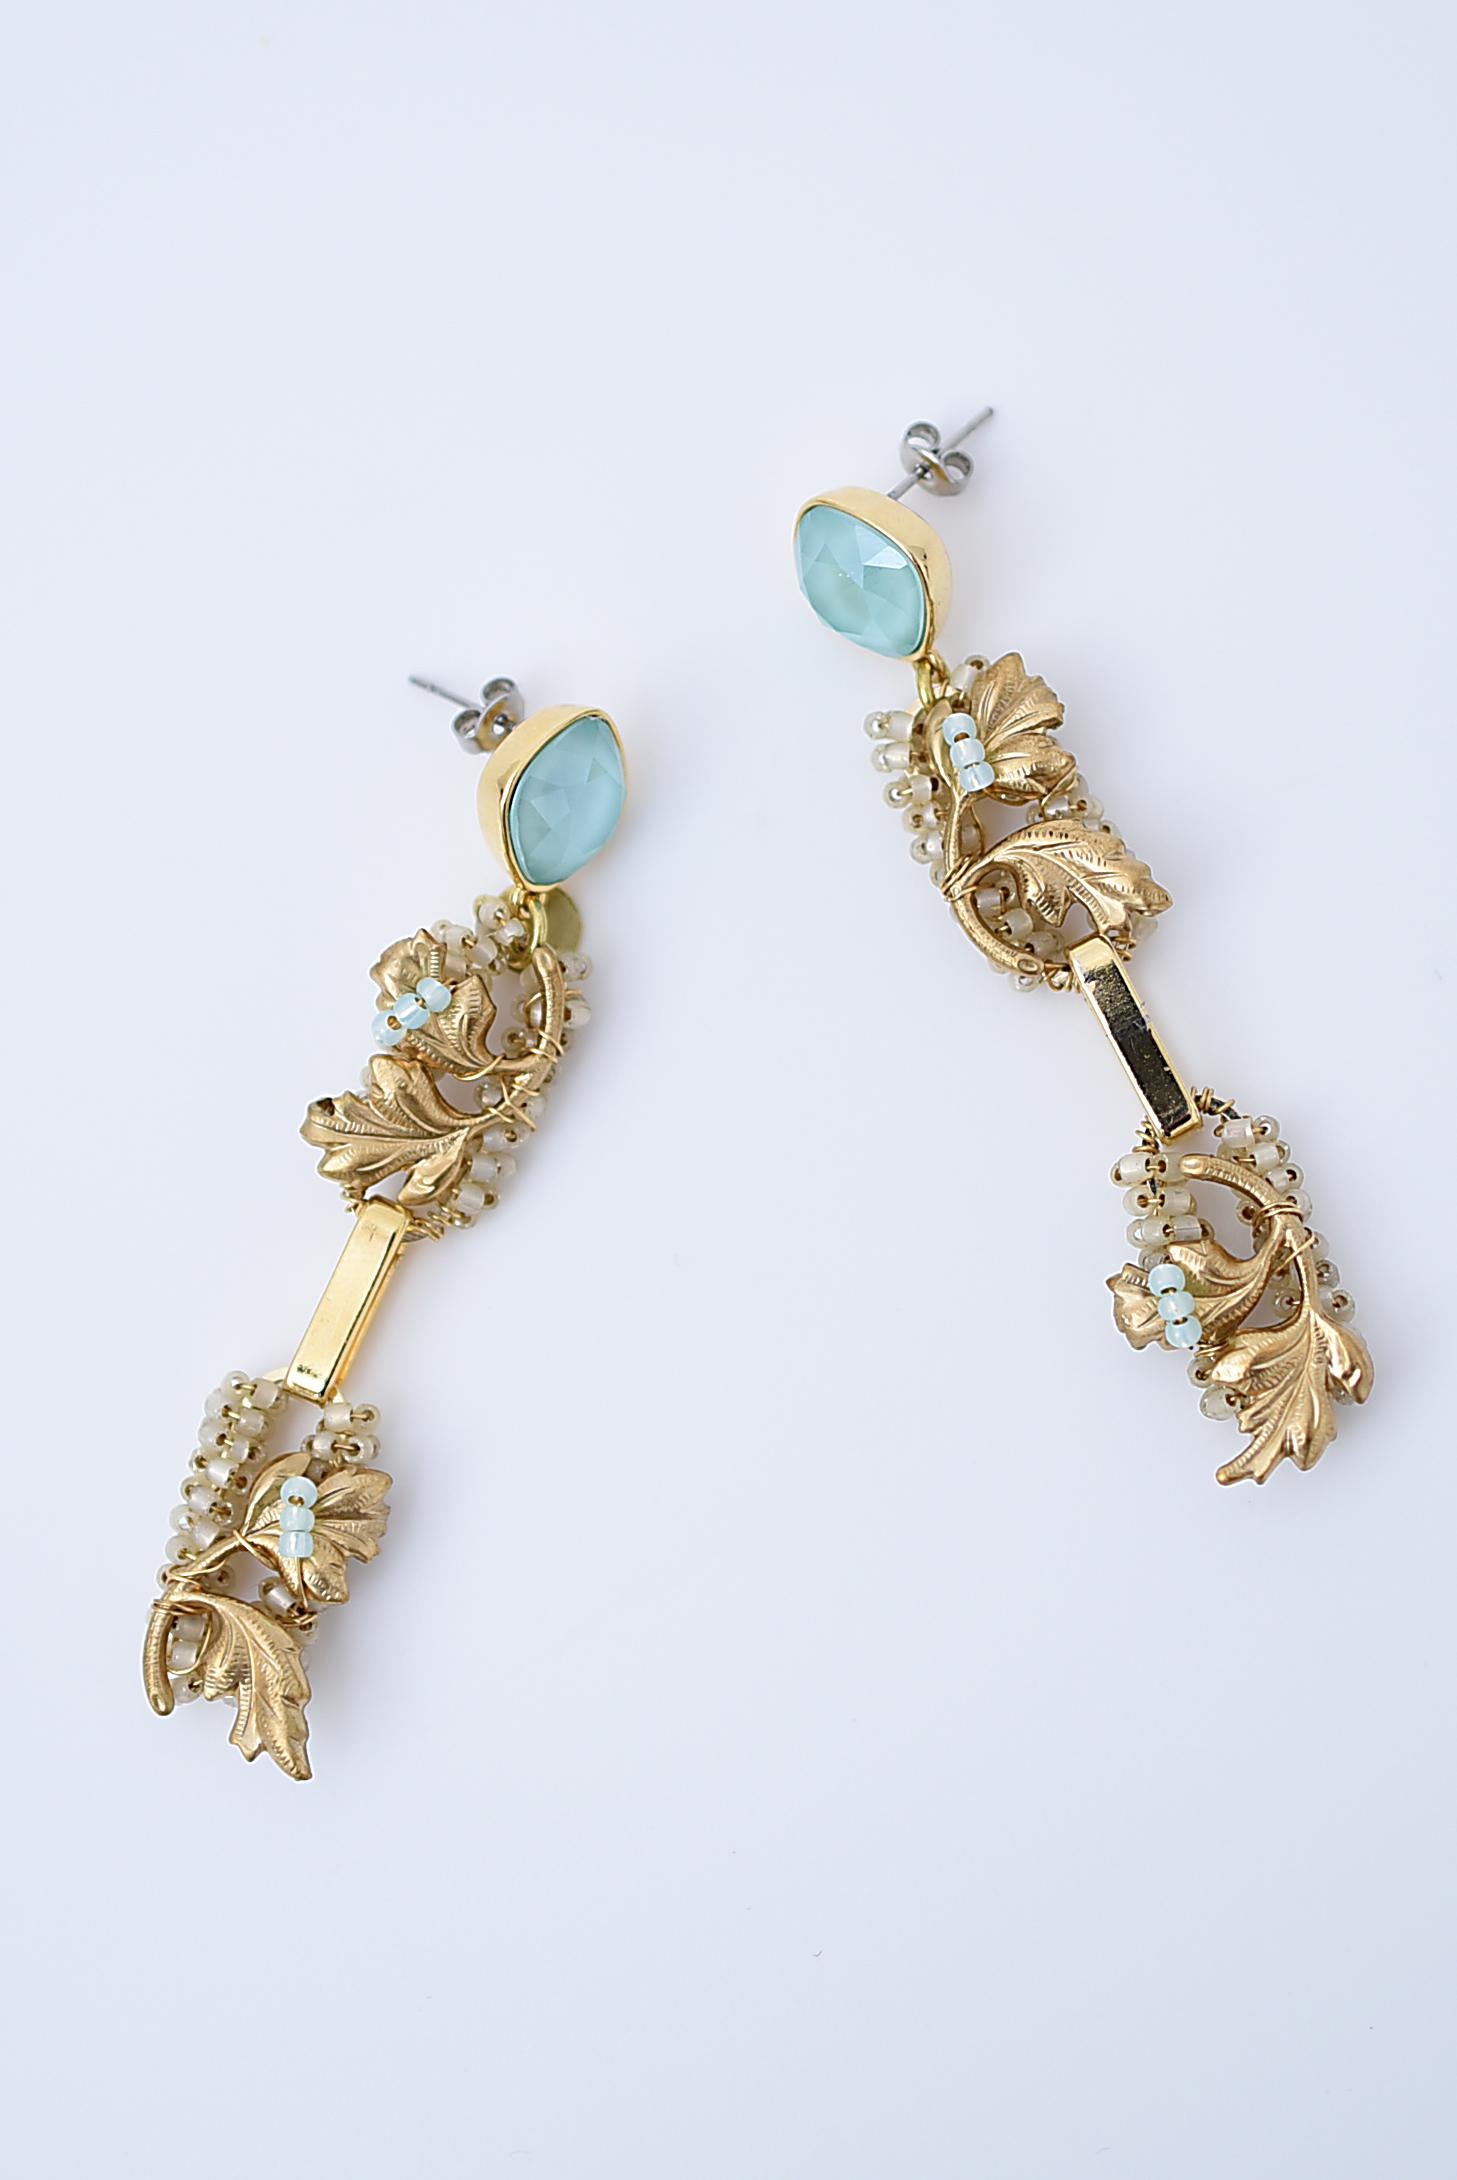 material:1970’s American vintage parts,glass beads,brass,swarovski,stainless
size:length 7cm

The refreshing mint green Swarovski sits snugly on the ear.
The lower part of the Swarovski is wiggling and swaying.
Although the earrings are long, they